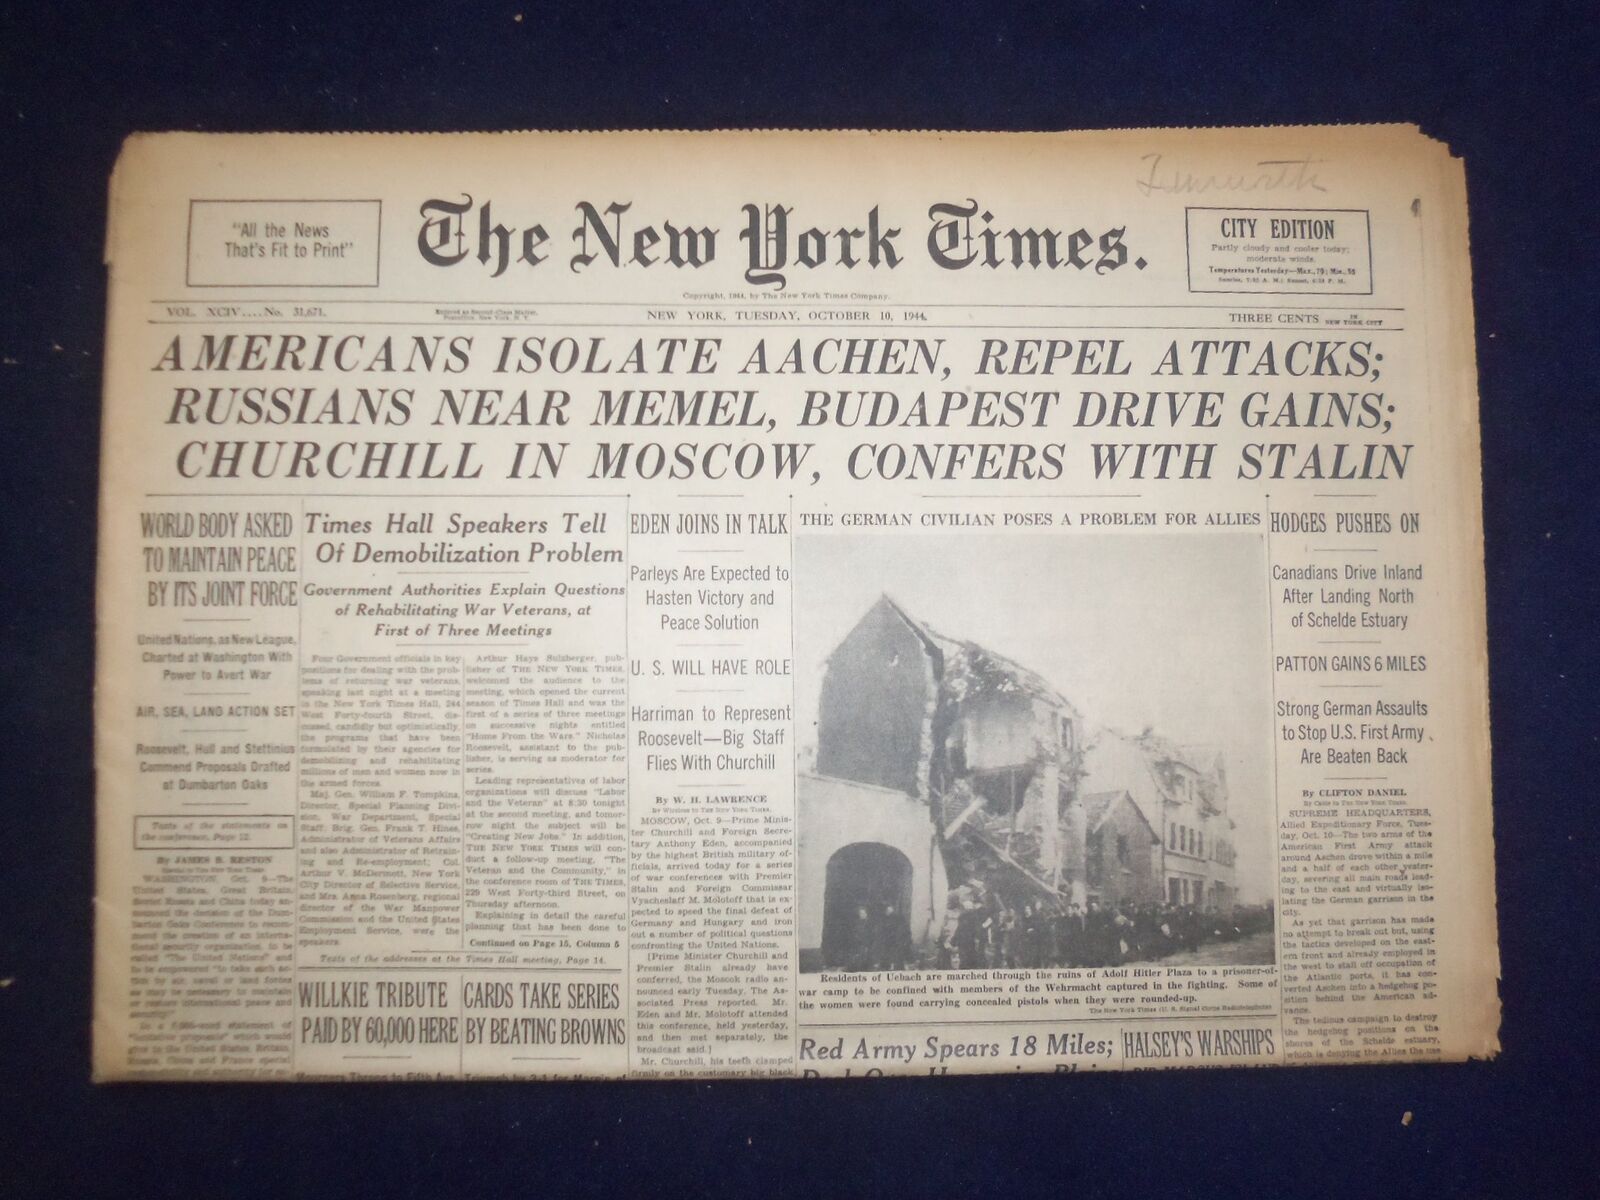 1944 OCT 10 NEW YORK TIMES - AMERICANS ISOLATE AACHEN, REPEL ATTACKS - NP 6638